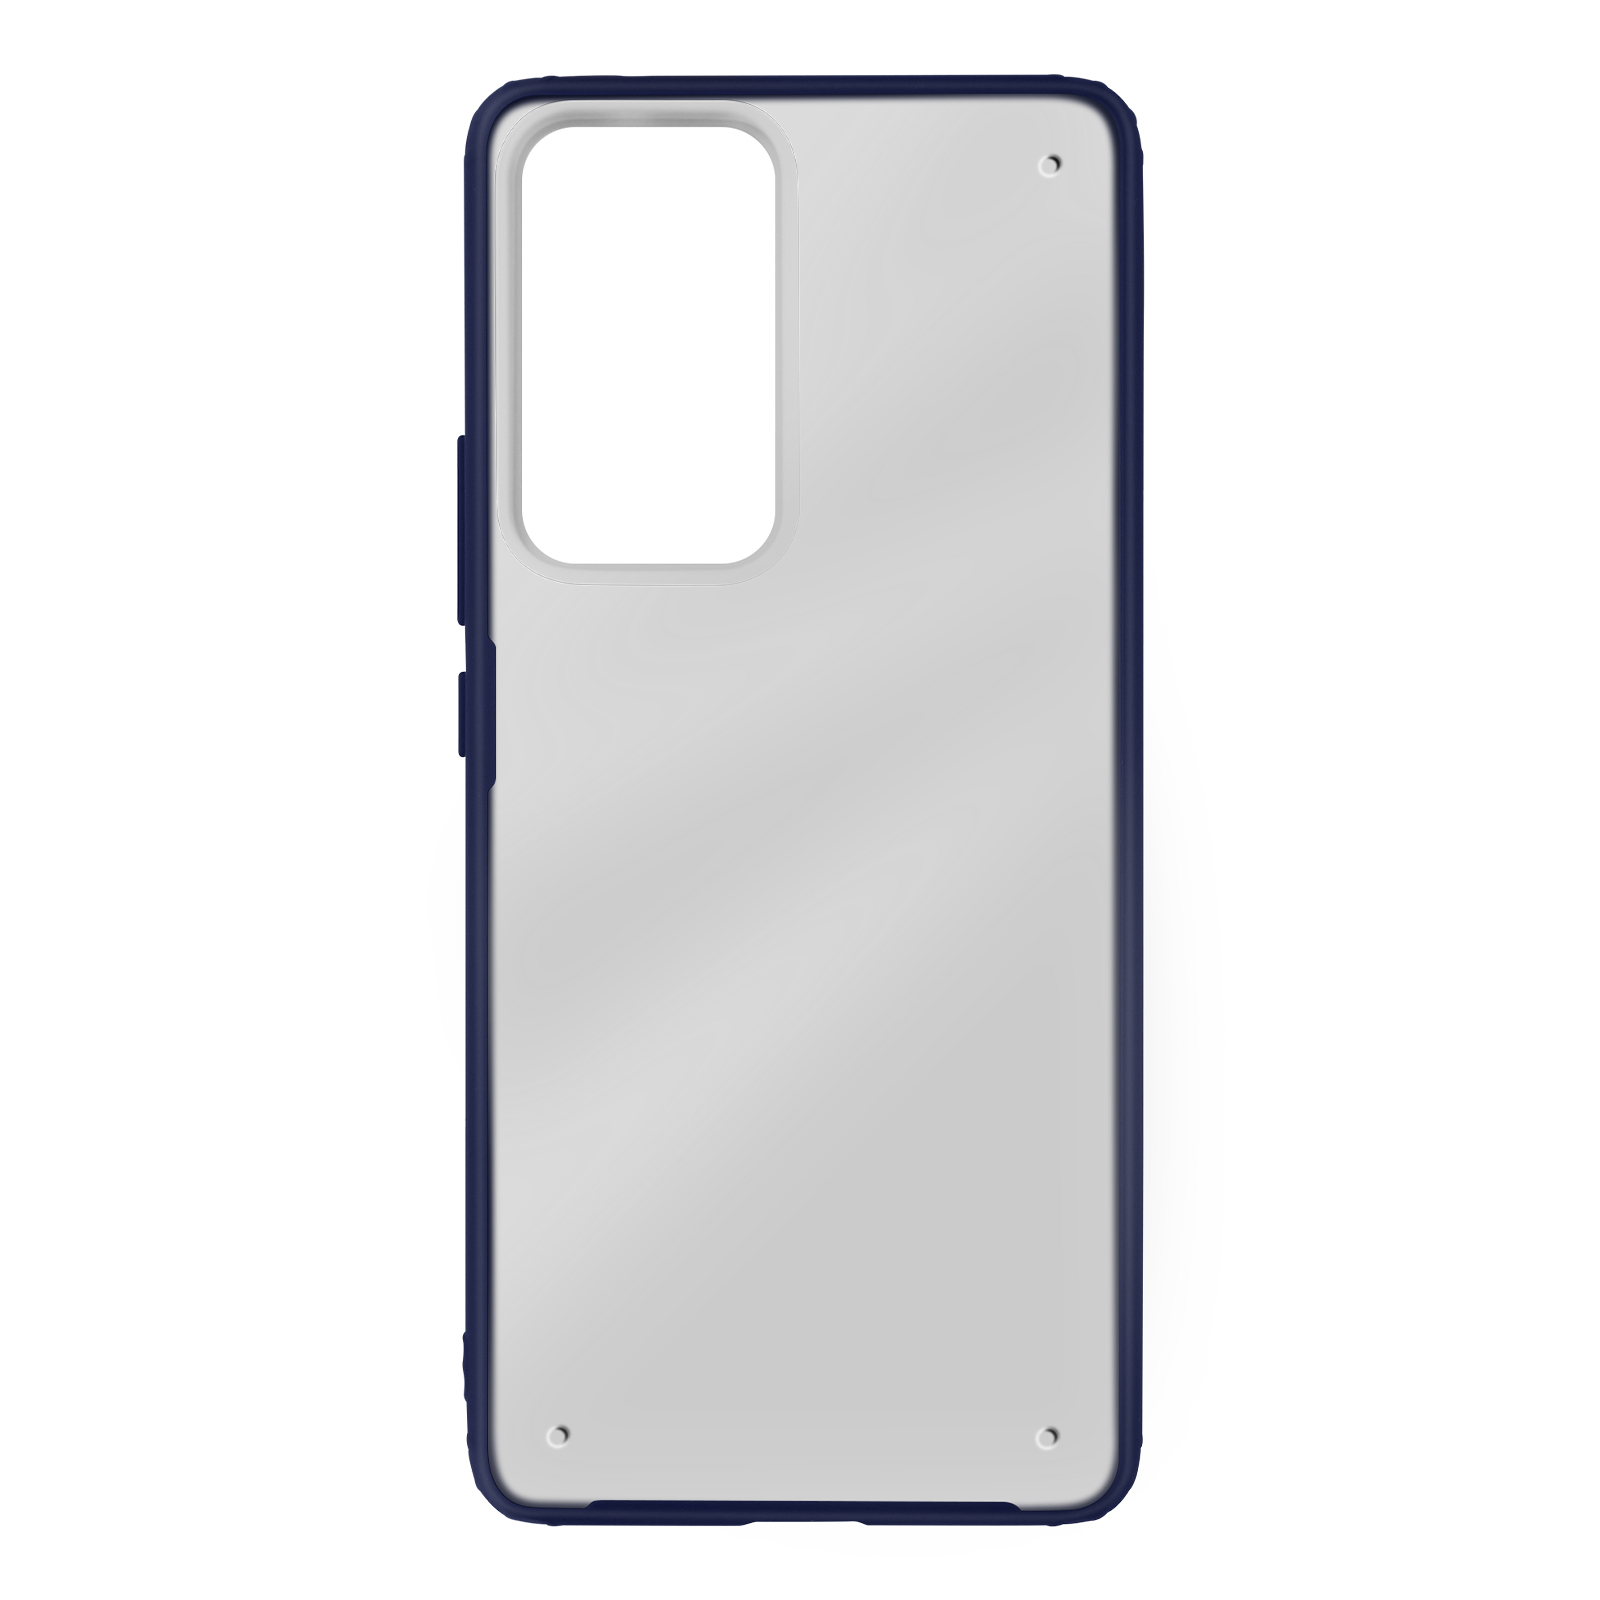 Backcover, AVIZAR Series, Blau Xiaomi, Frosted 12 Pro,